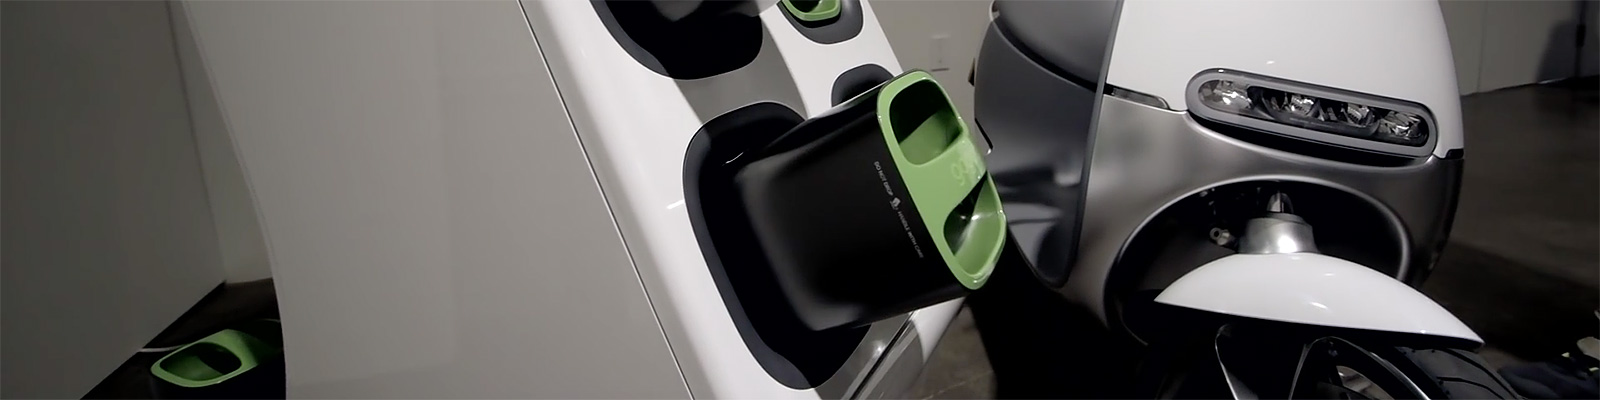 Gogoro's electric scooter of the future — CES 2015